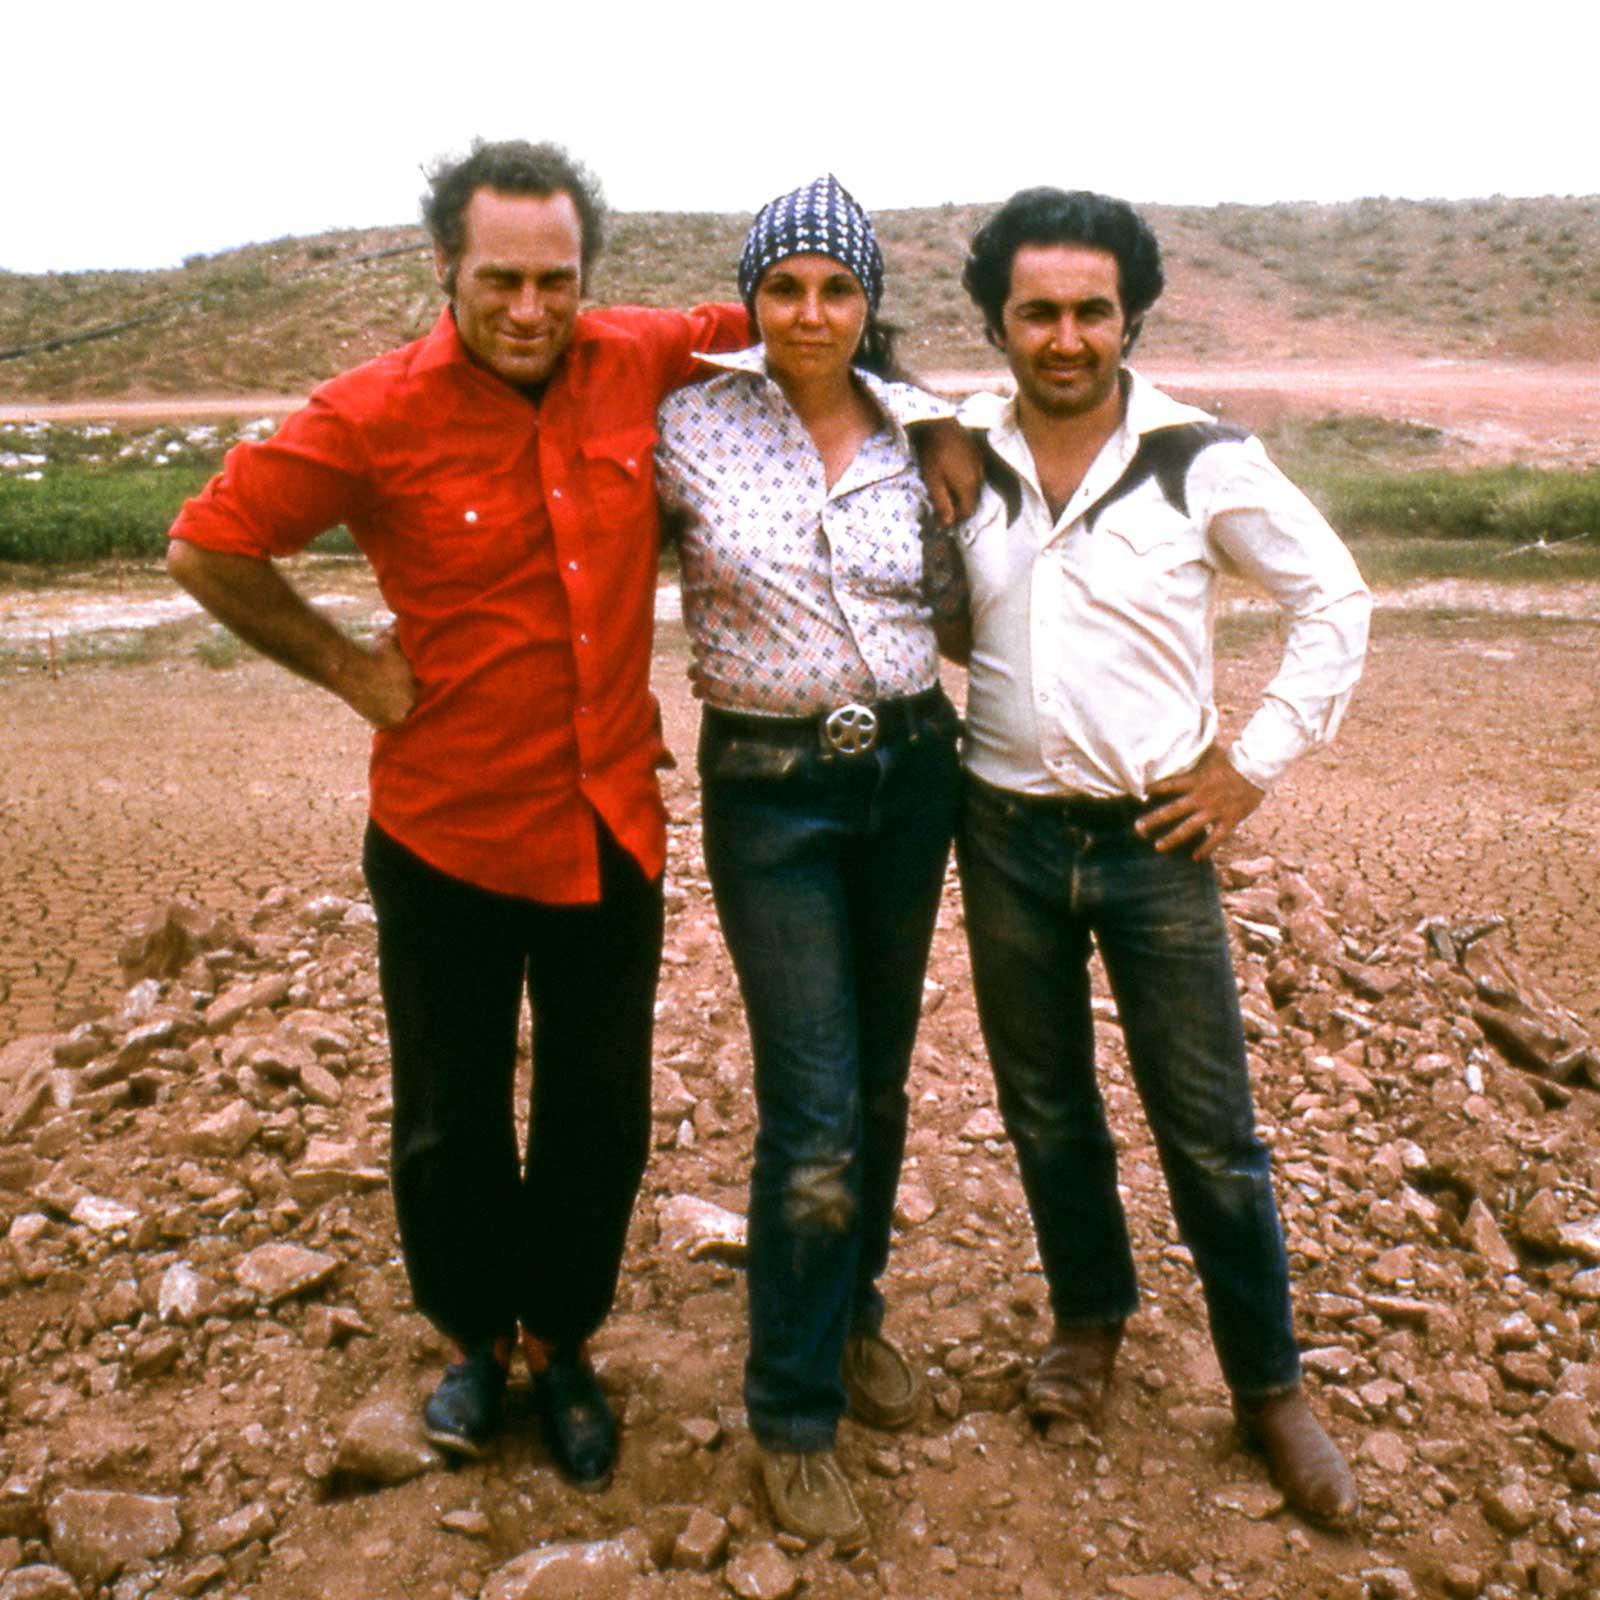 Three figures standing at the site of Amarillo Ramp in Texas